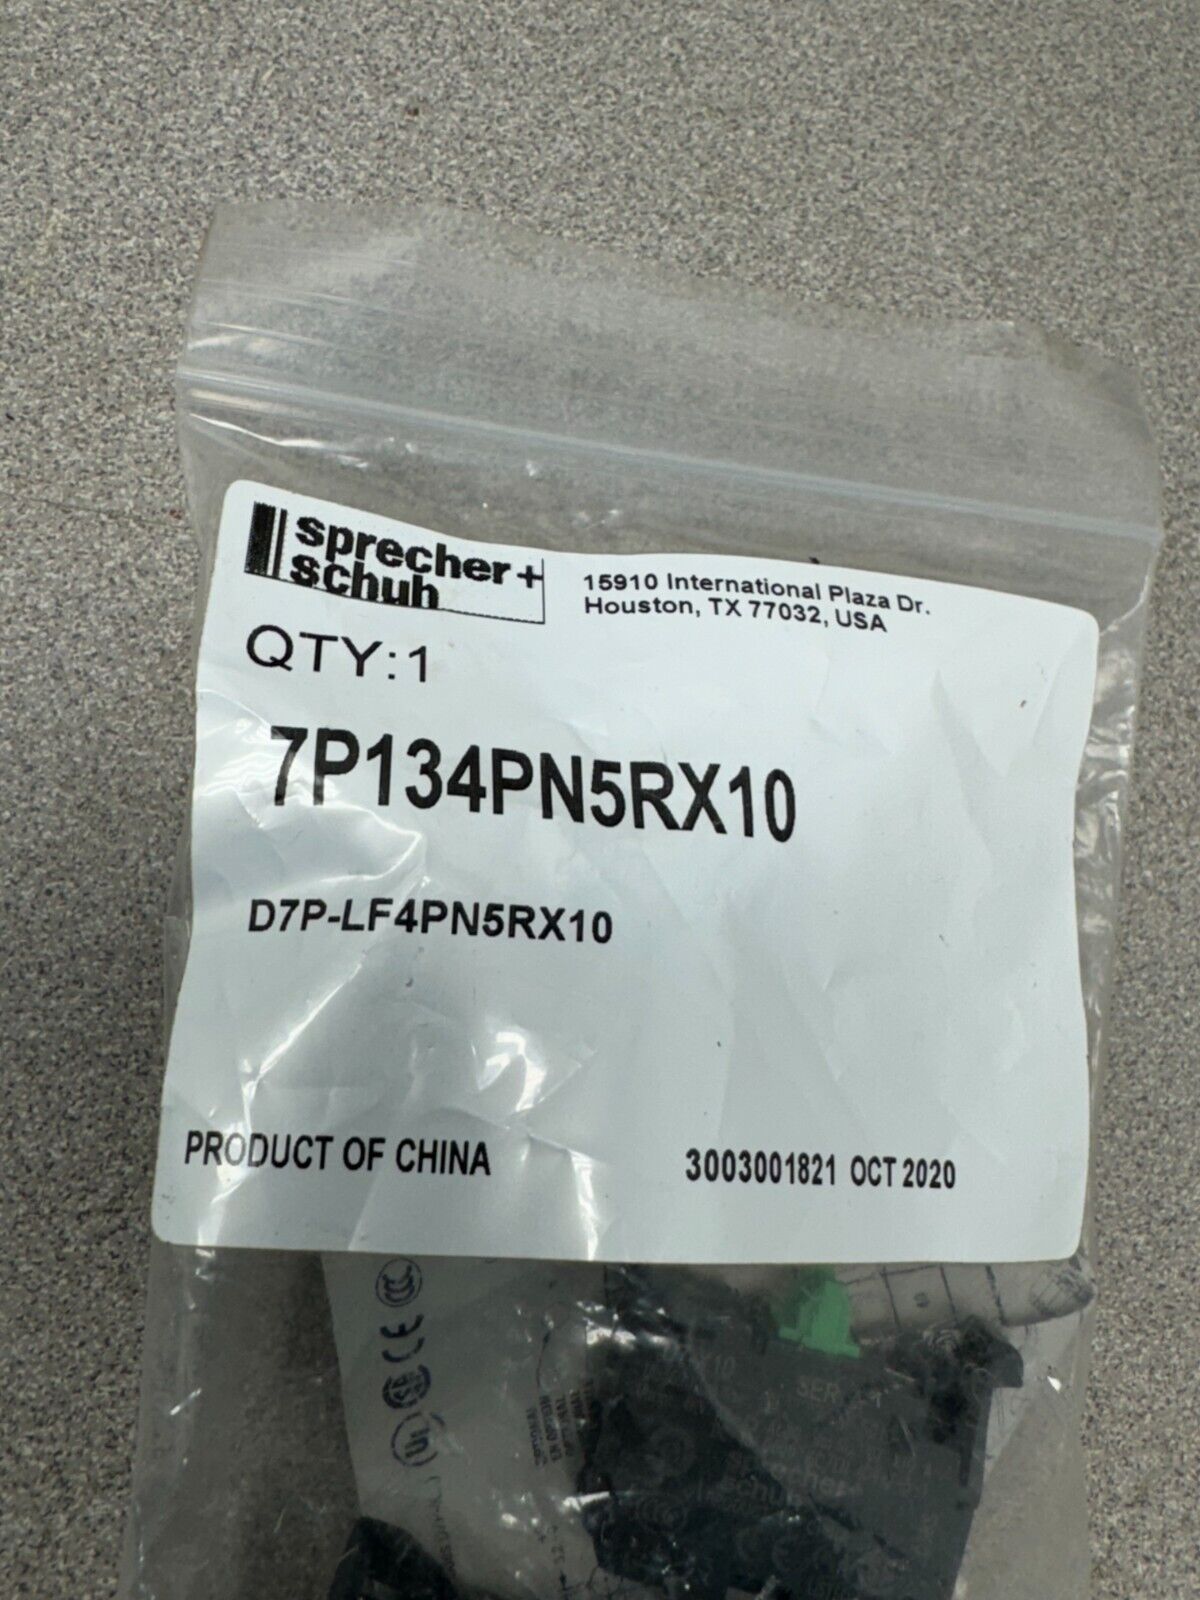 NEW IN PACKAGE SPRECHER SCHUH PUSH BUTTON SWITCH D7P-LF4PN5RX10